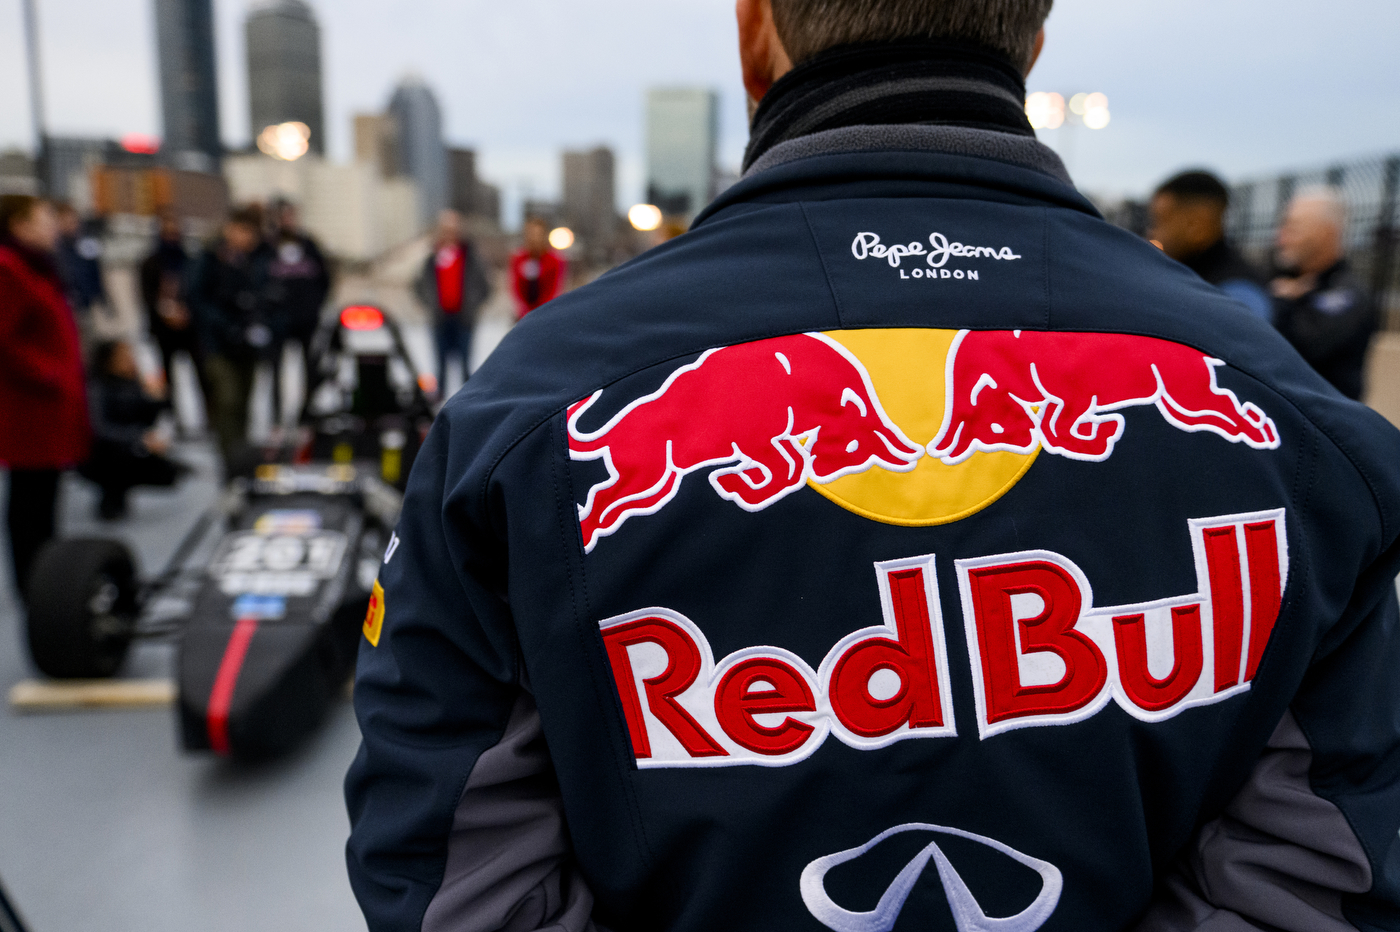 Person wearing Red Bull jacket